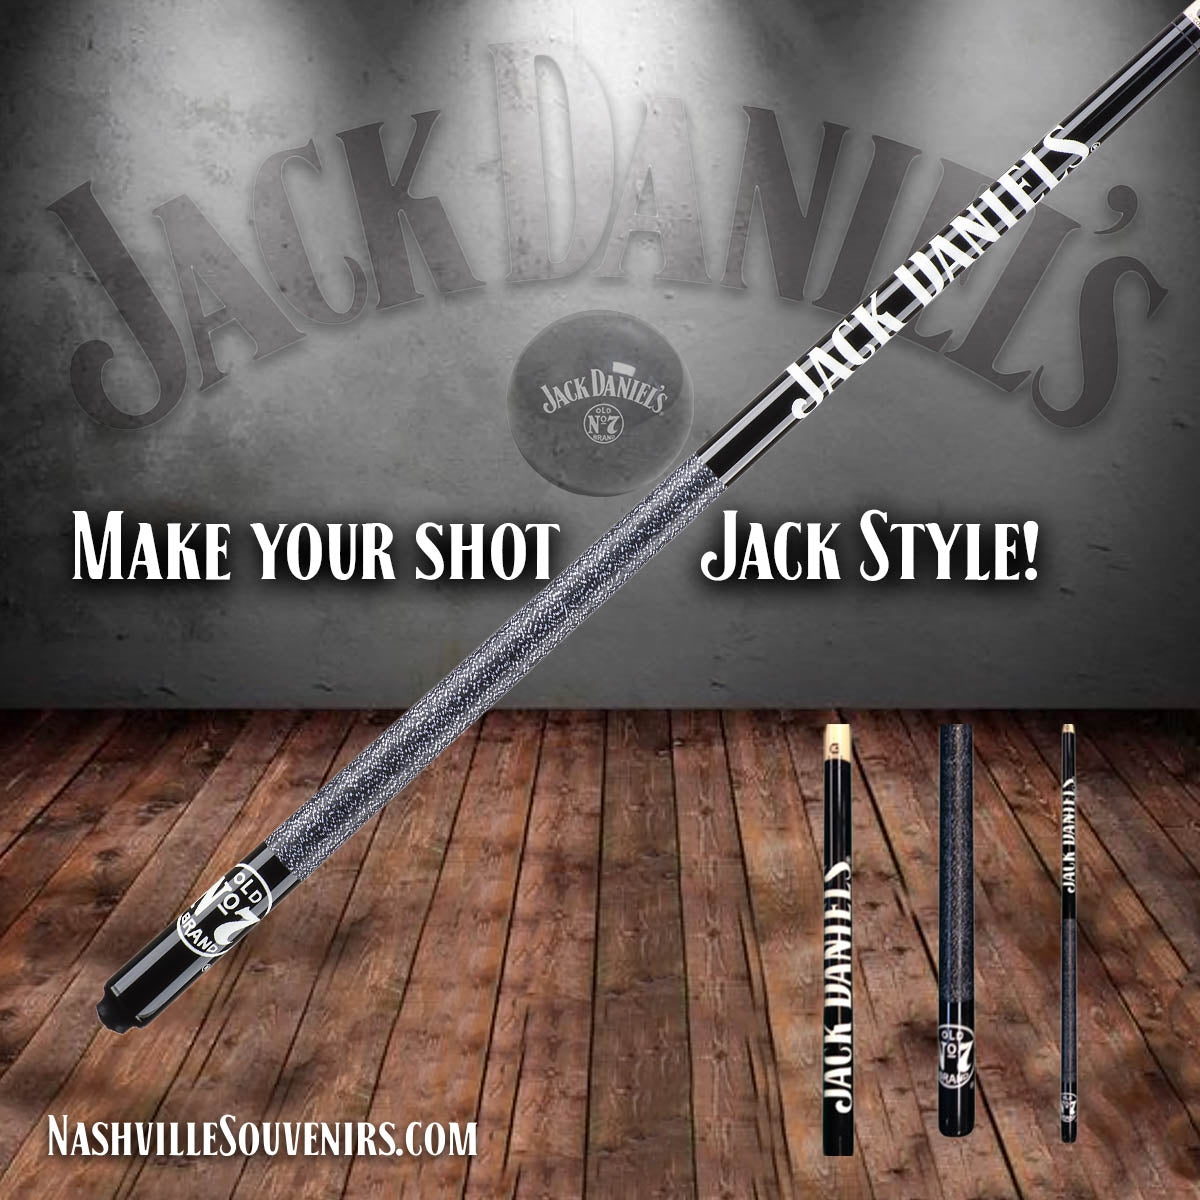 The Jack Daniel's cue stick is manufactured by McDermott, a worldwide leader in billiards products. The two piece pool stick has an Irish linen wrap so you know the grip is true.